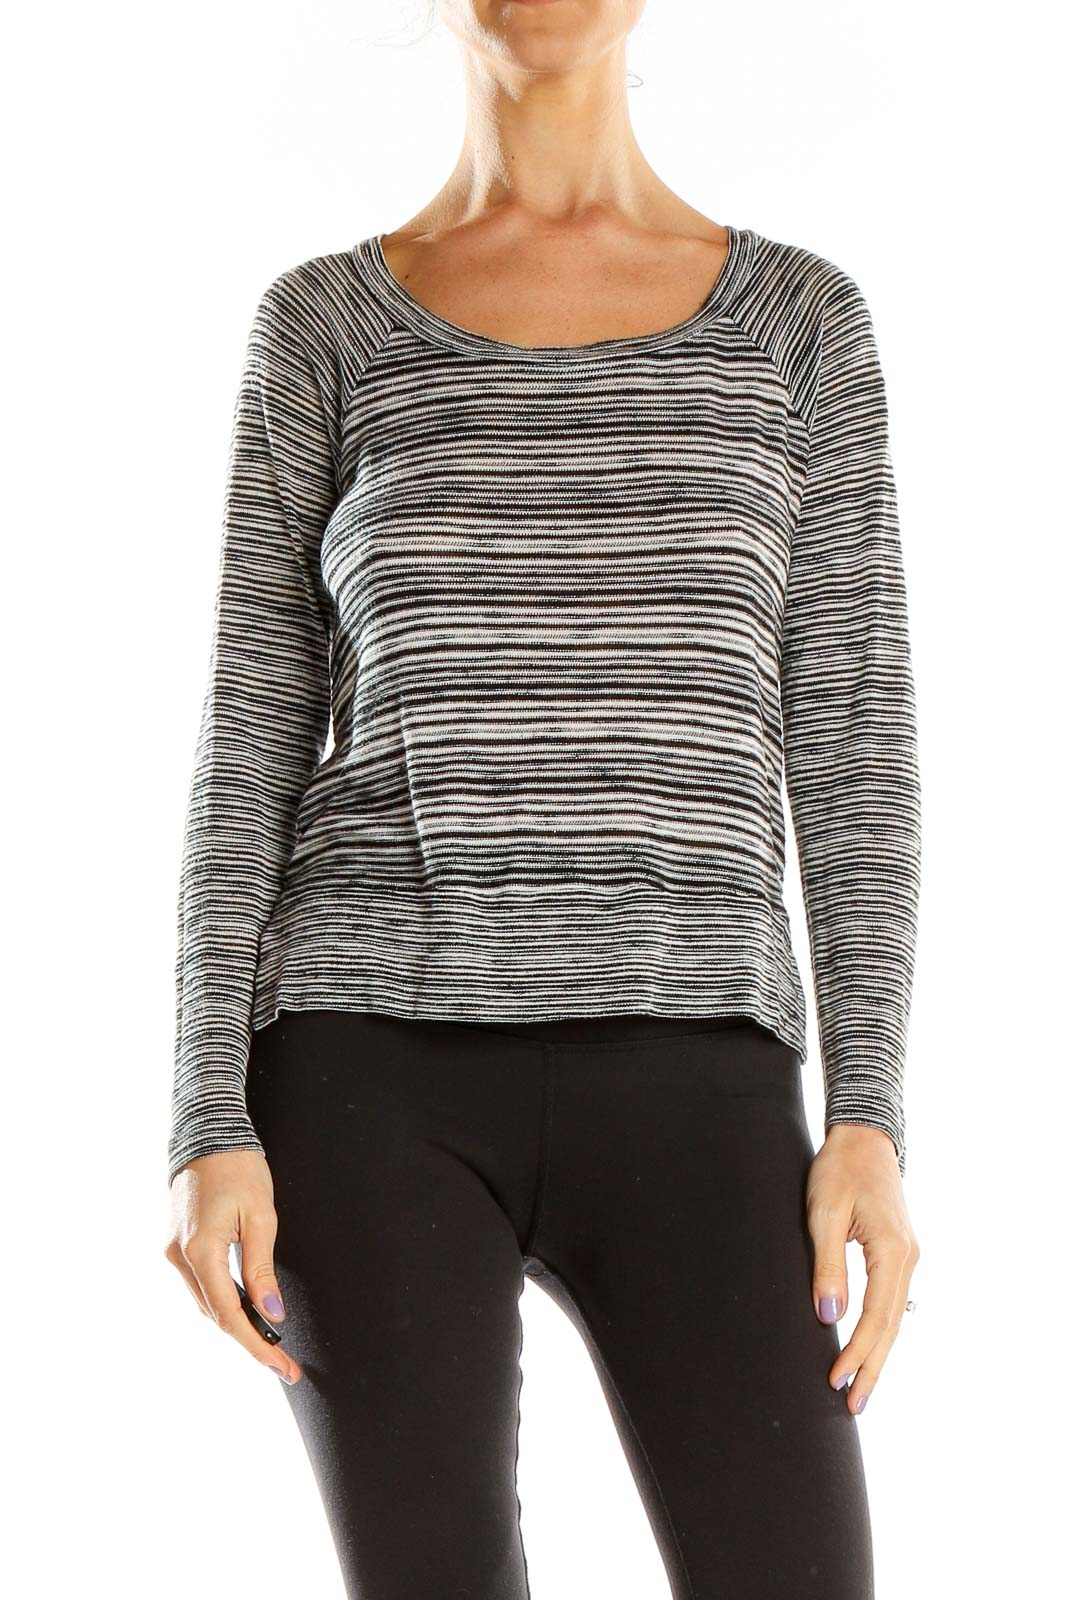 Gray Striped Casual Top Front